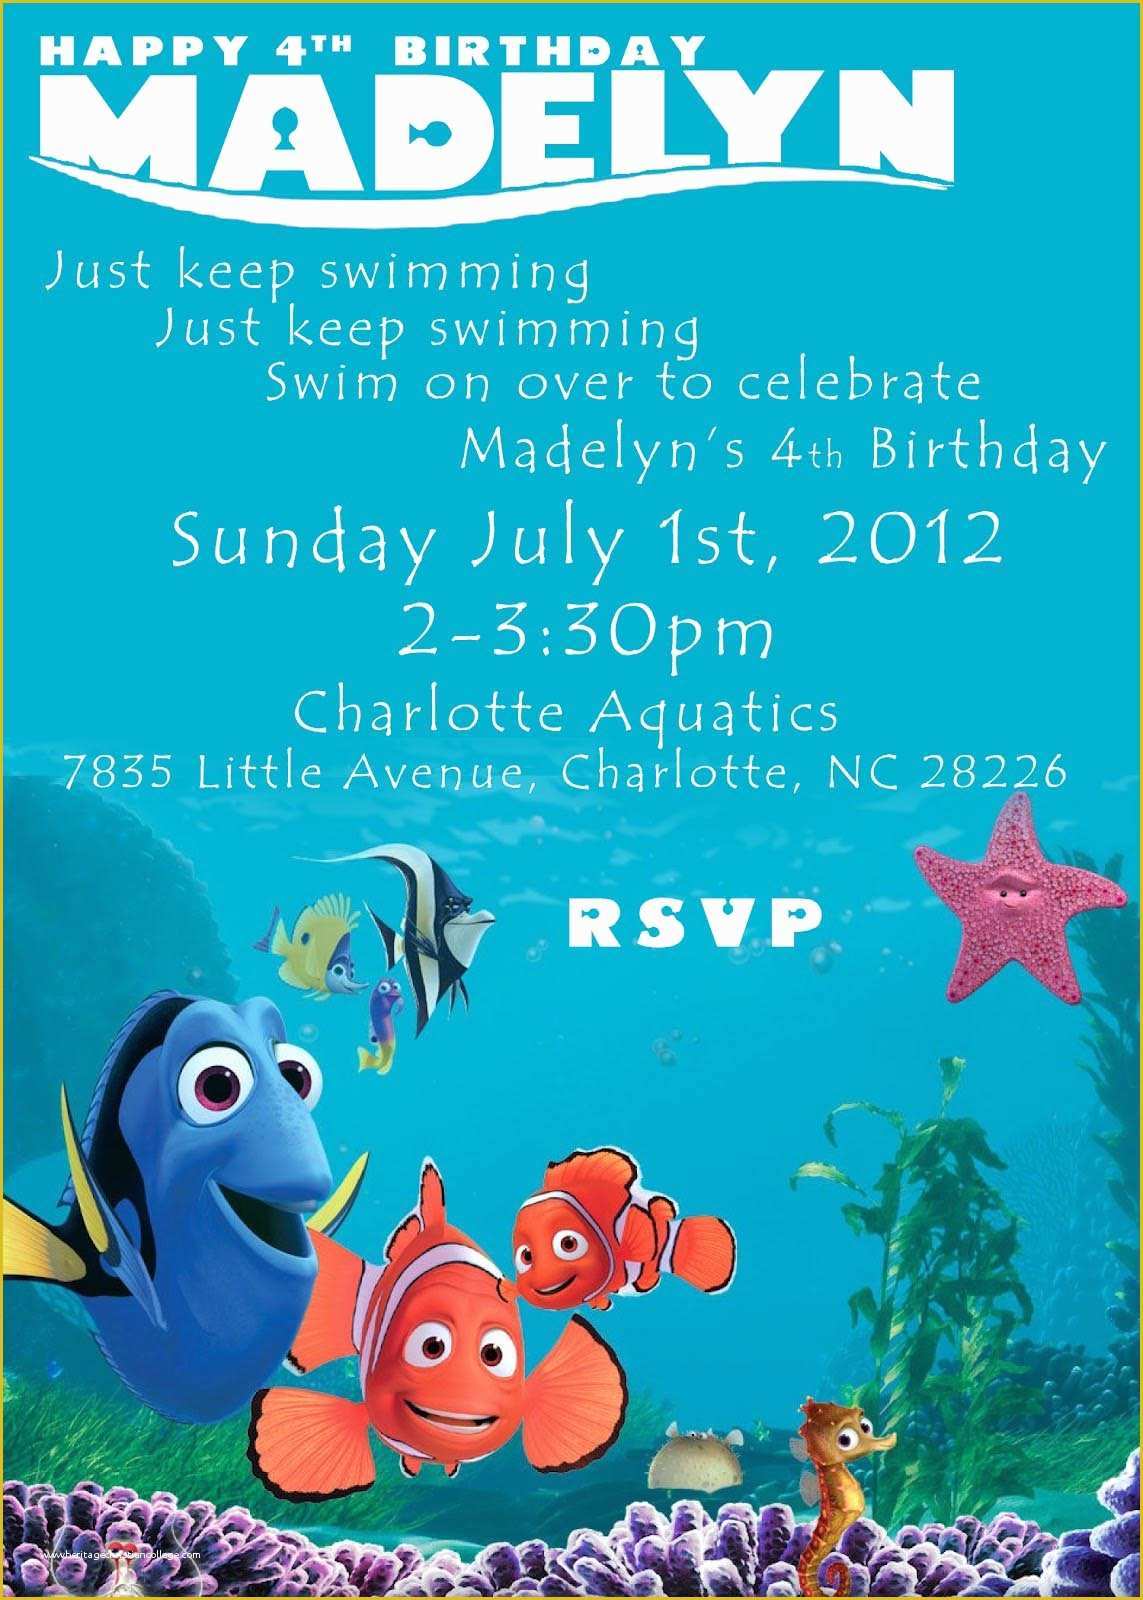 finding-nemo-invitation-template-free-of-travel-in-the-ocean-at-a-nemo